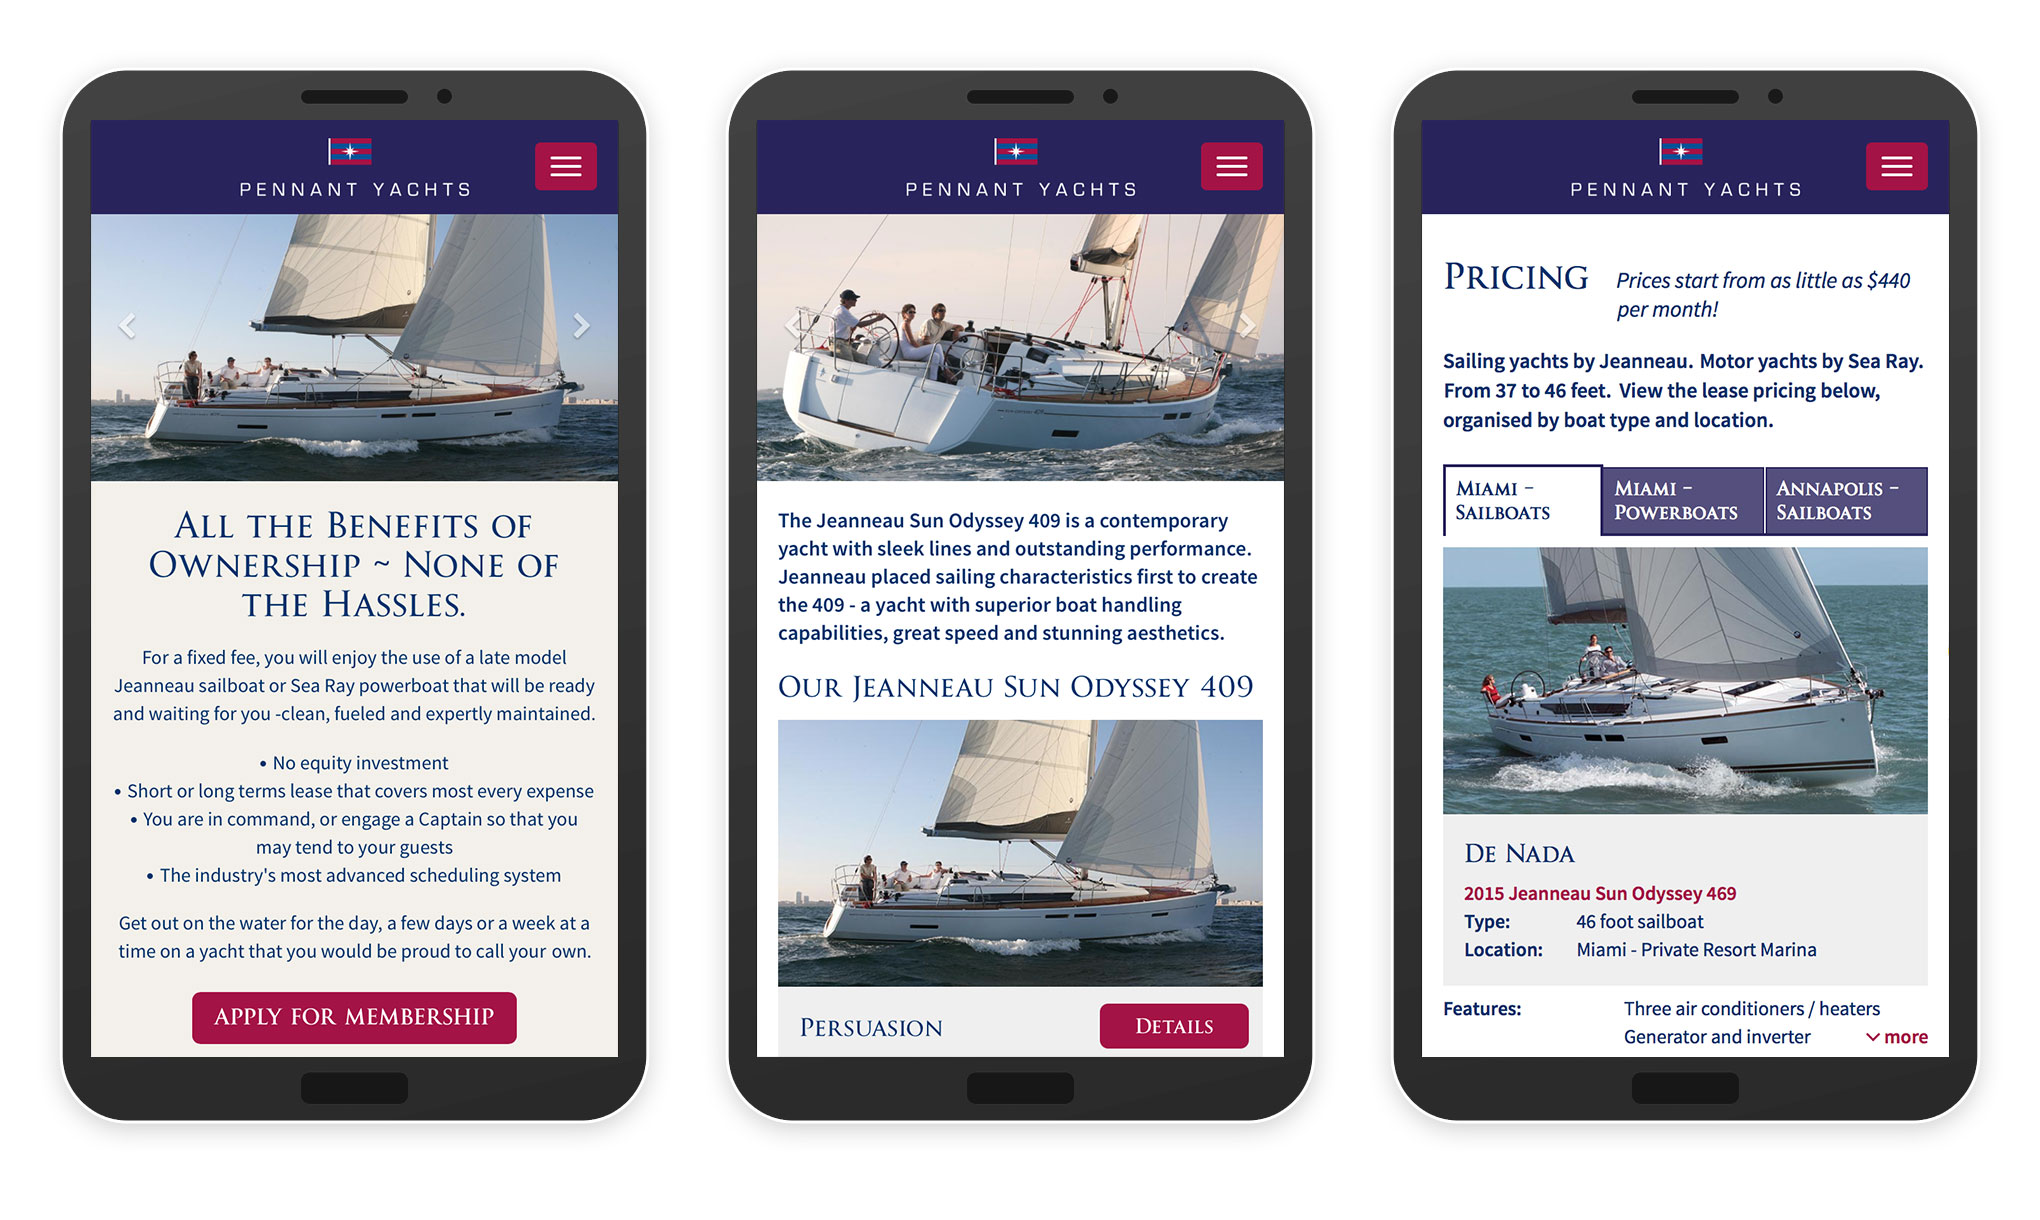 The Pennant Yachts website optimised for mobile.